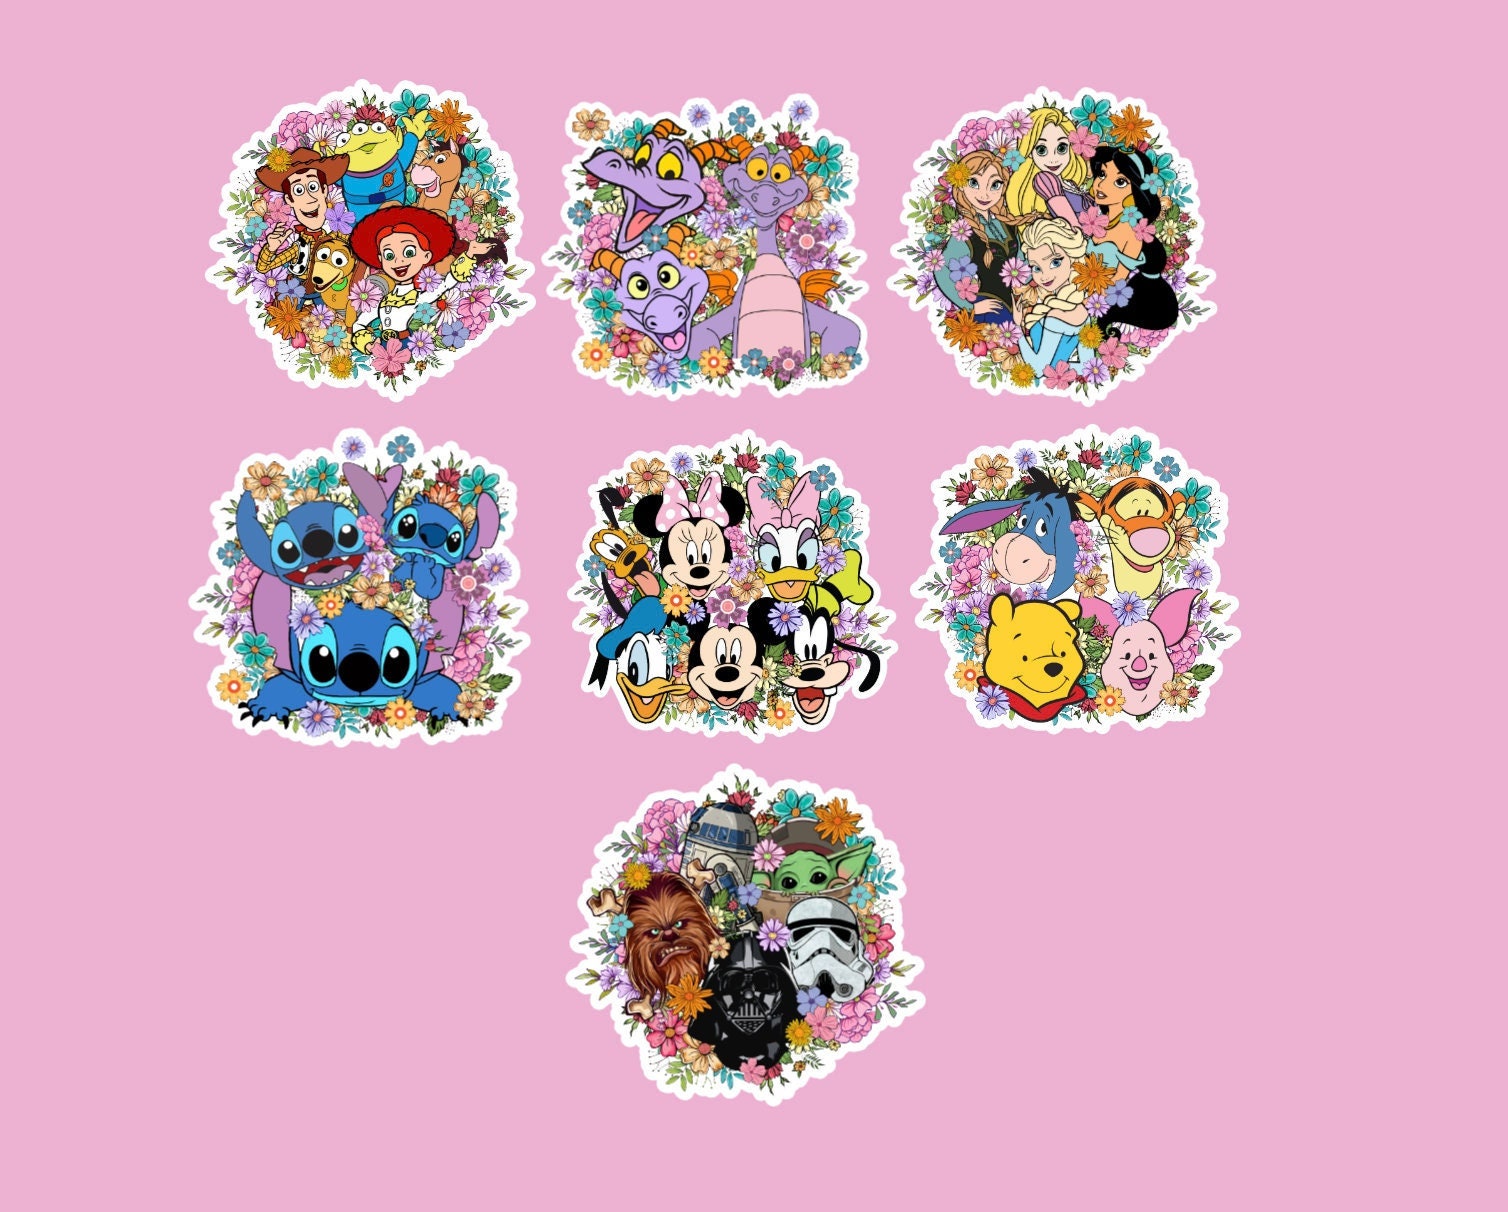 Storybook Disney Stickers Waterproof Transparent for Phone Cases